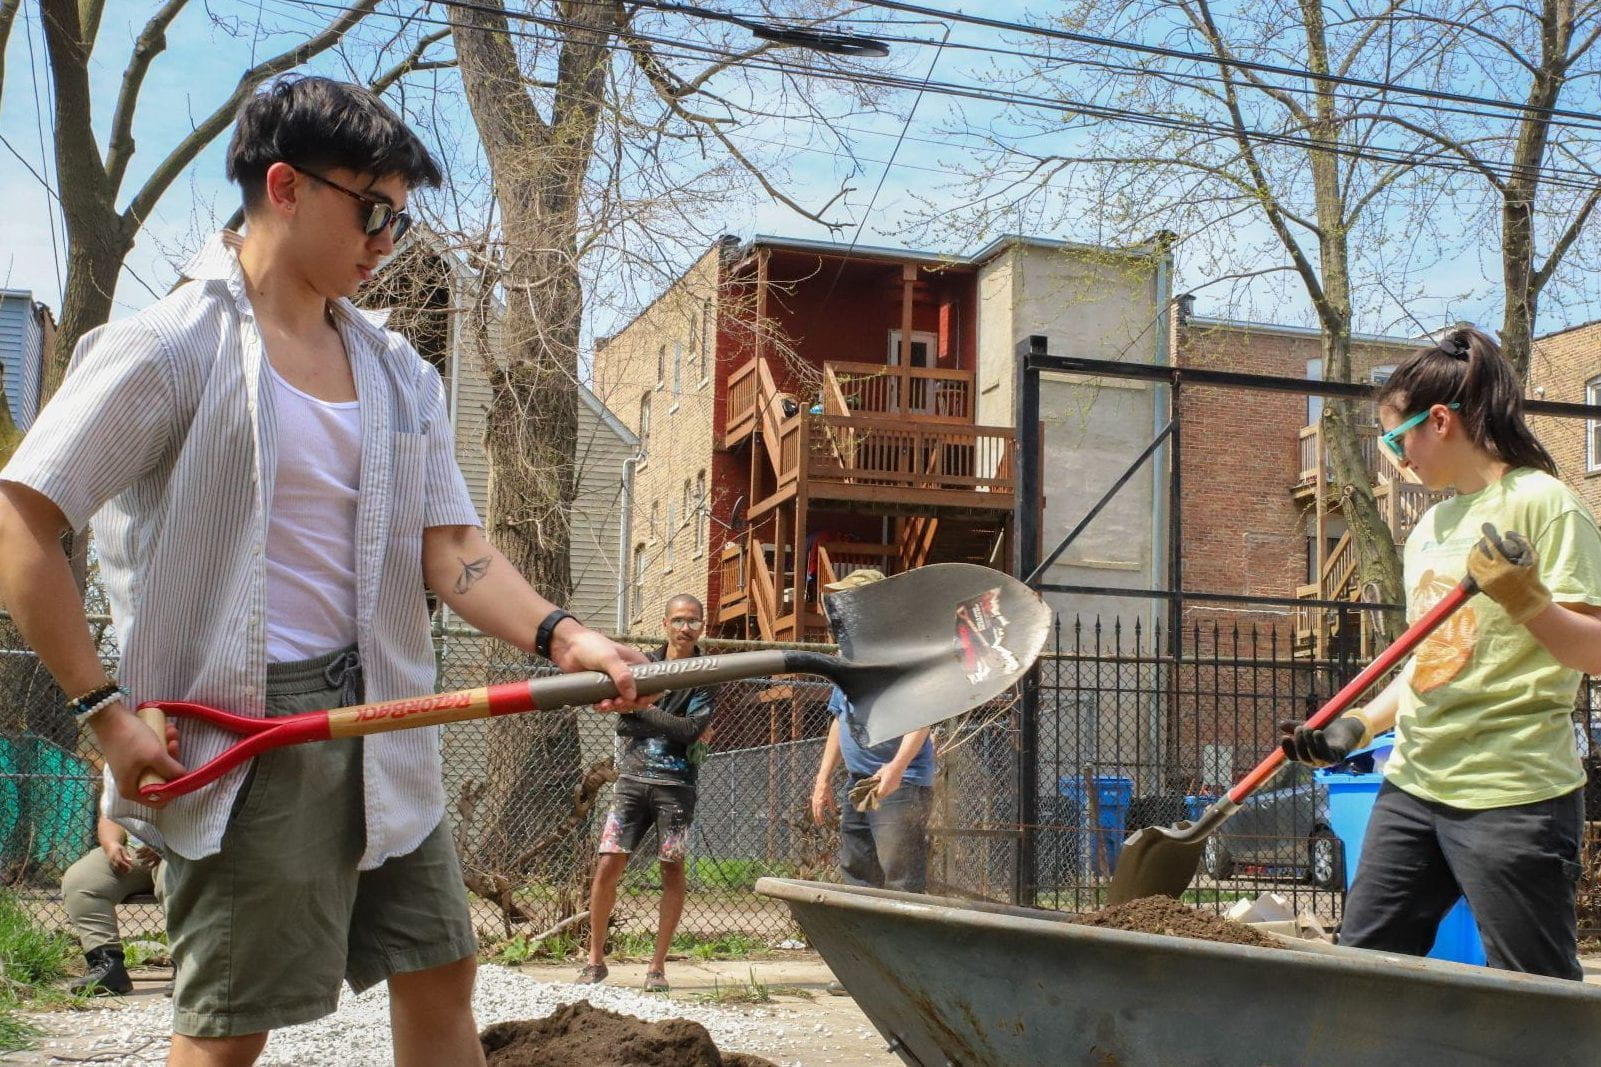 Two DePaul students wearing sunglasses work with shovels in a community garden in early spring. 

Photo by Quentin Blais, DePaul Journalism.